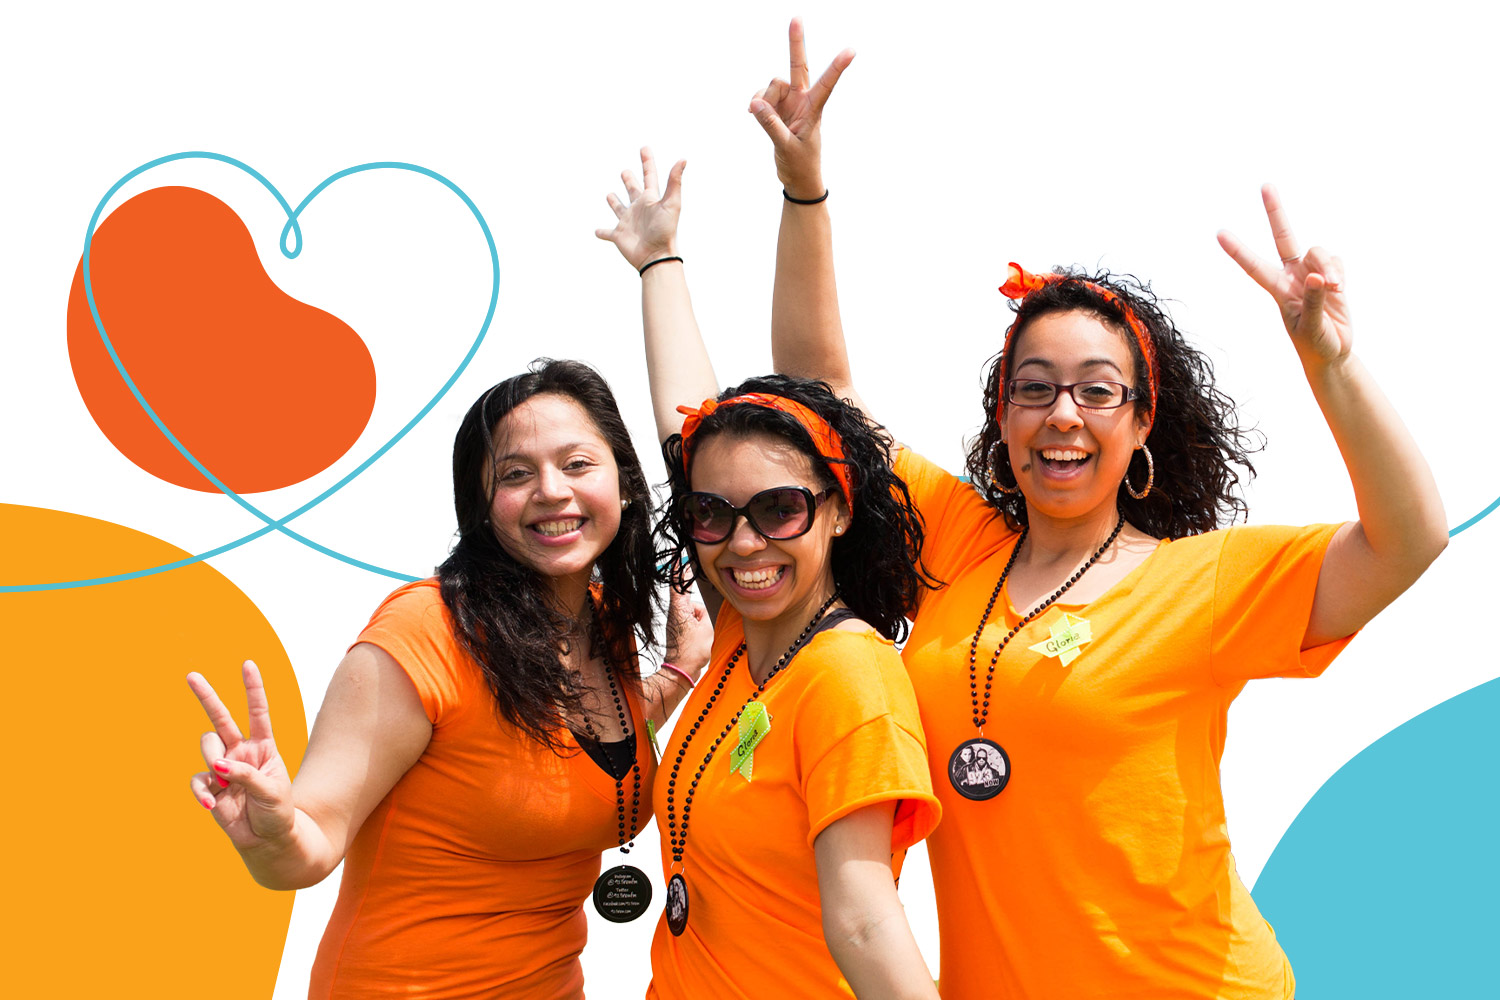 Three Kidney Walk participants cheering at a Walk event, surrounded by colorful graphics including a heart with a kidney bean